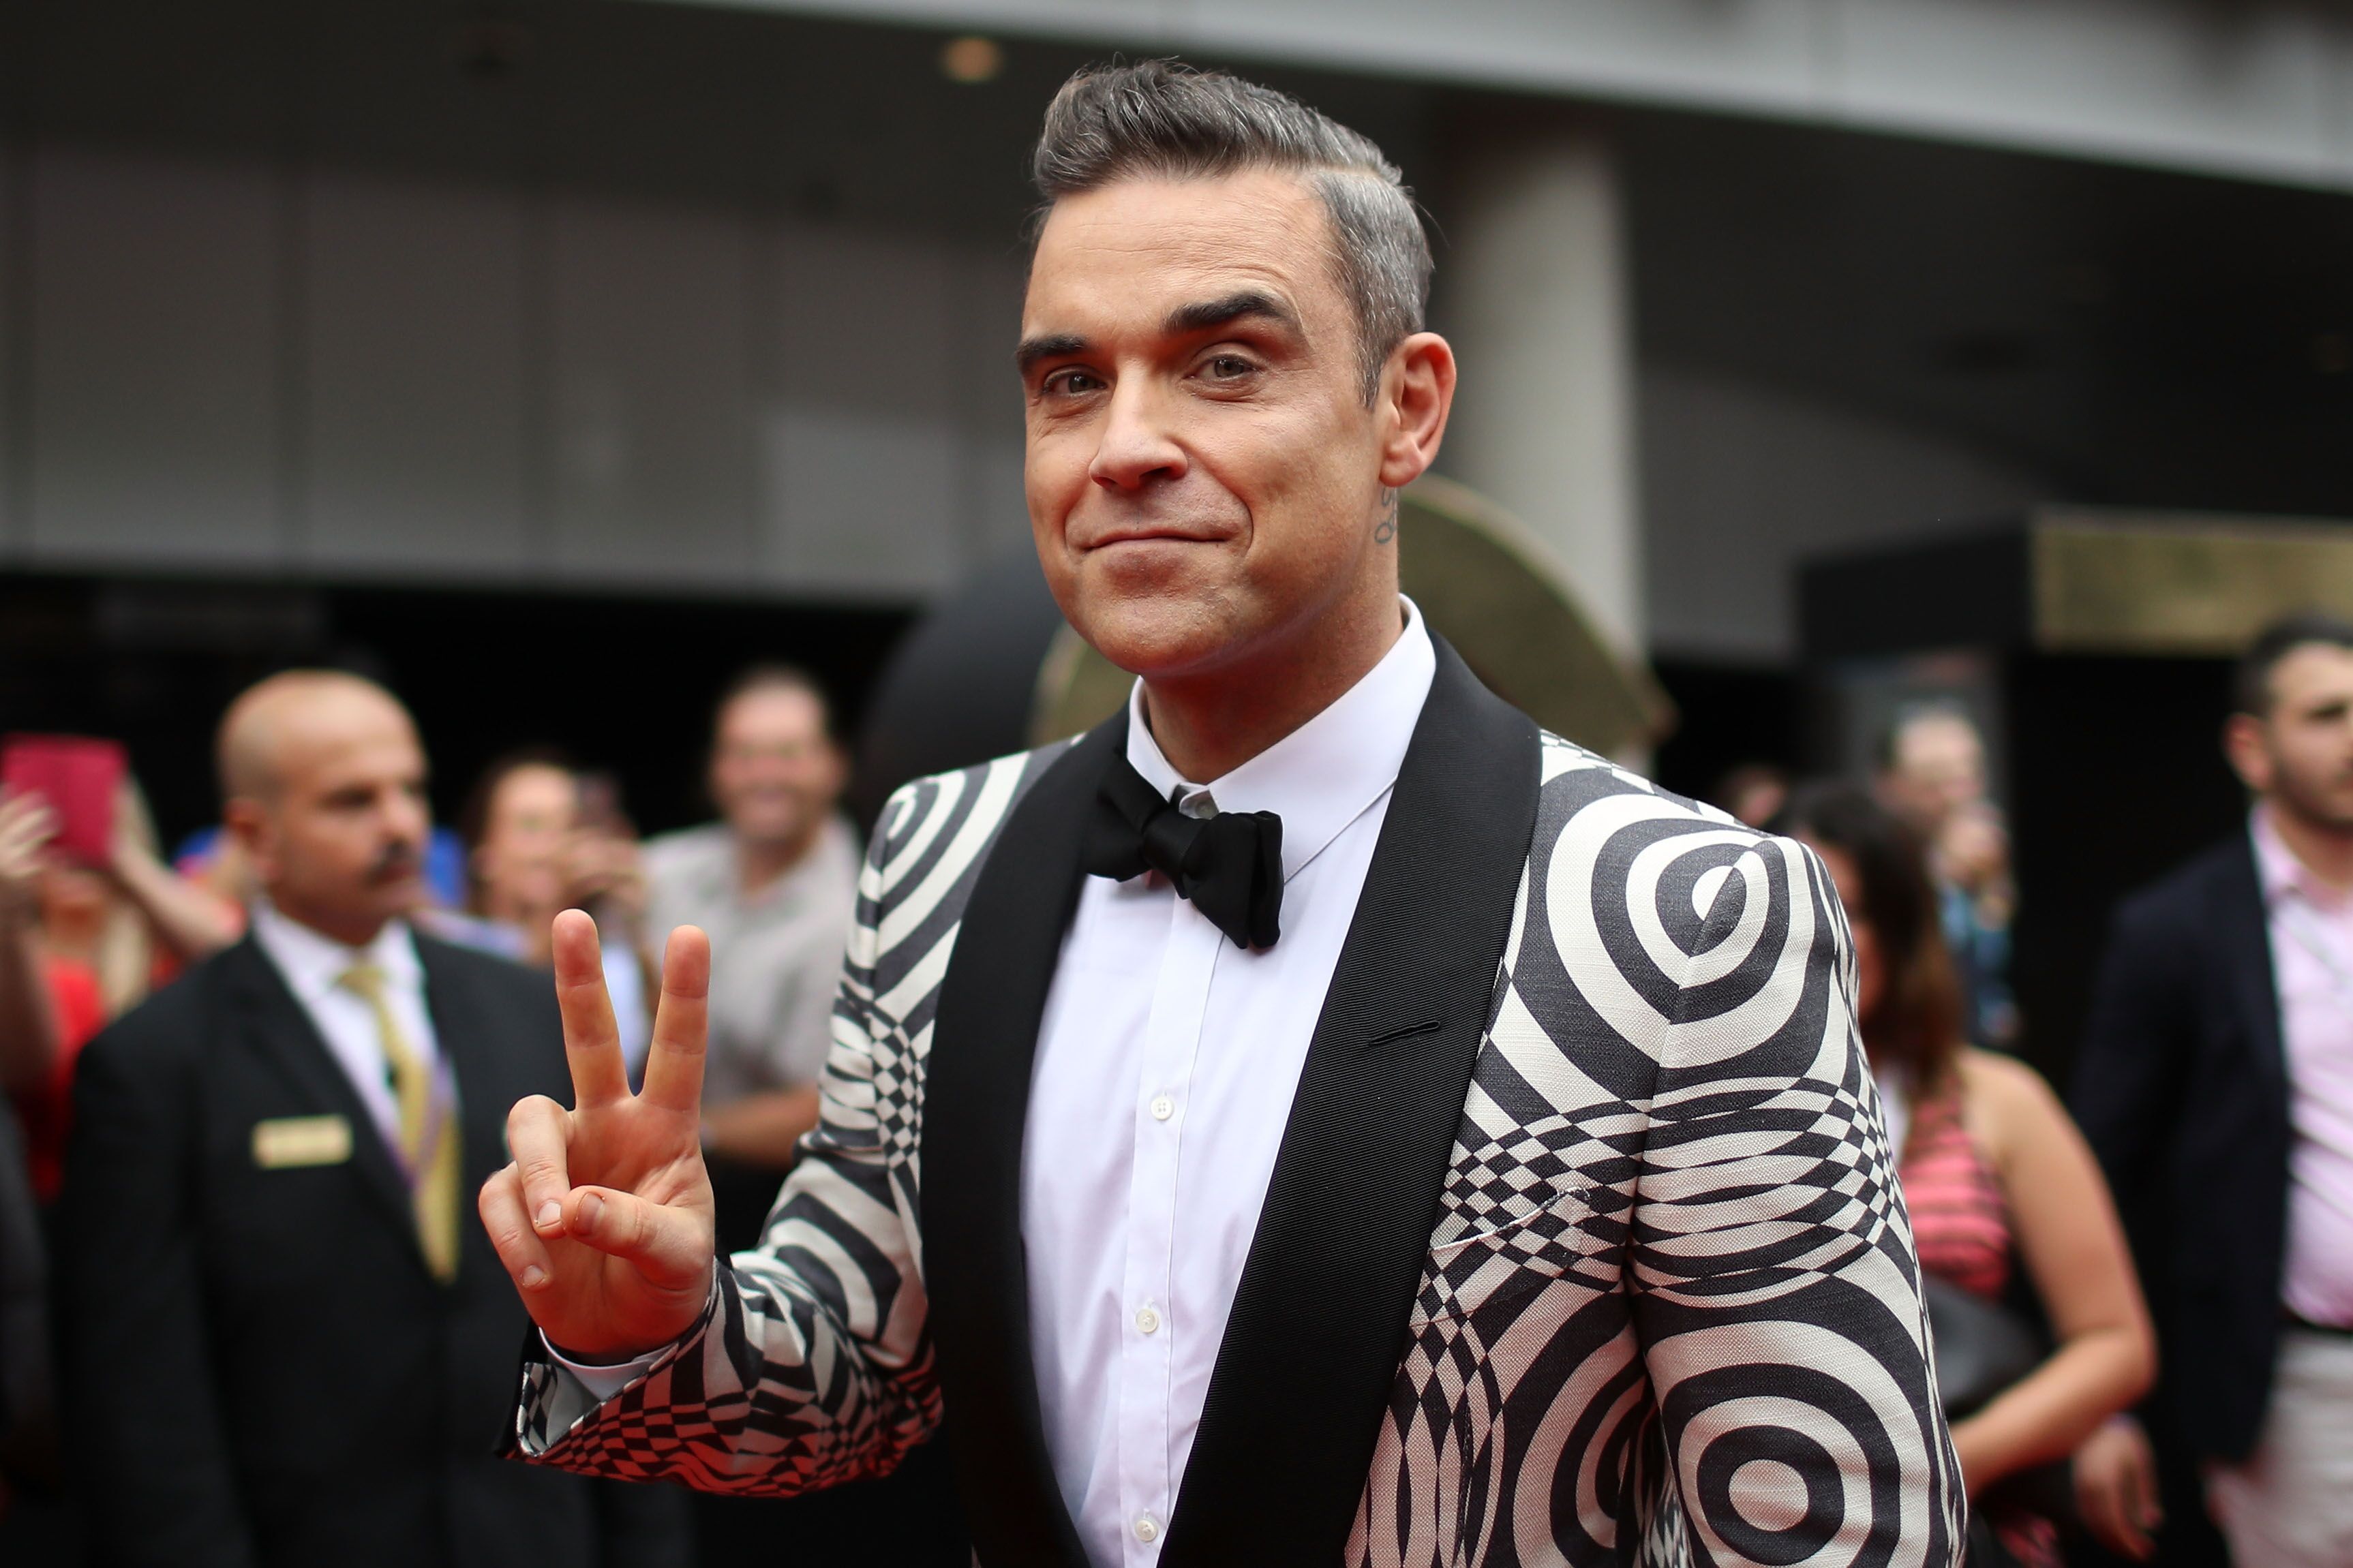 Robbie Williams arrives for the 30th Annual ARIA Awards 2016. | Source: Getty Images